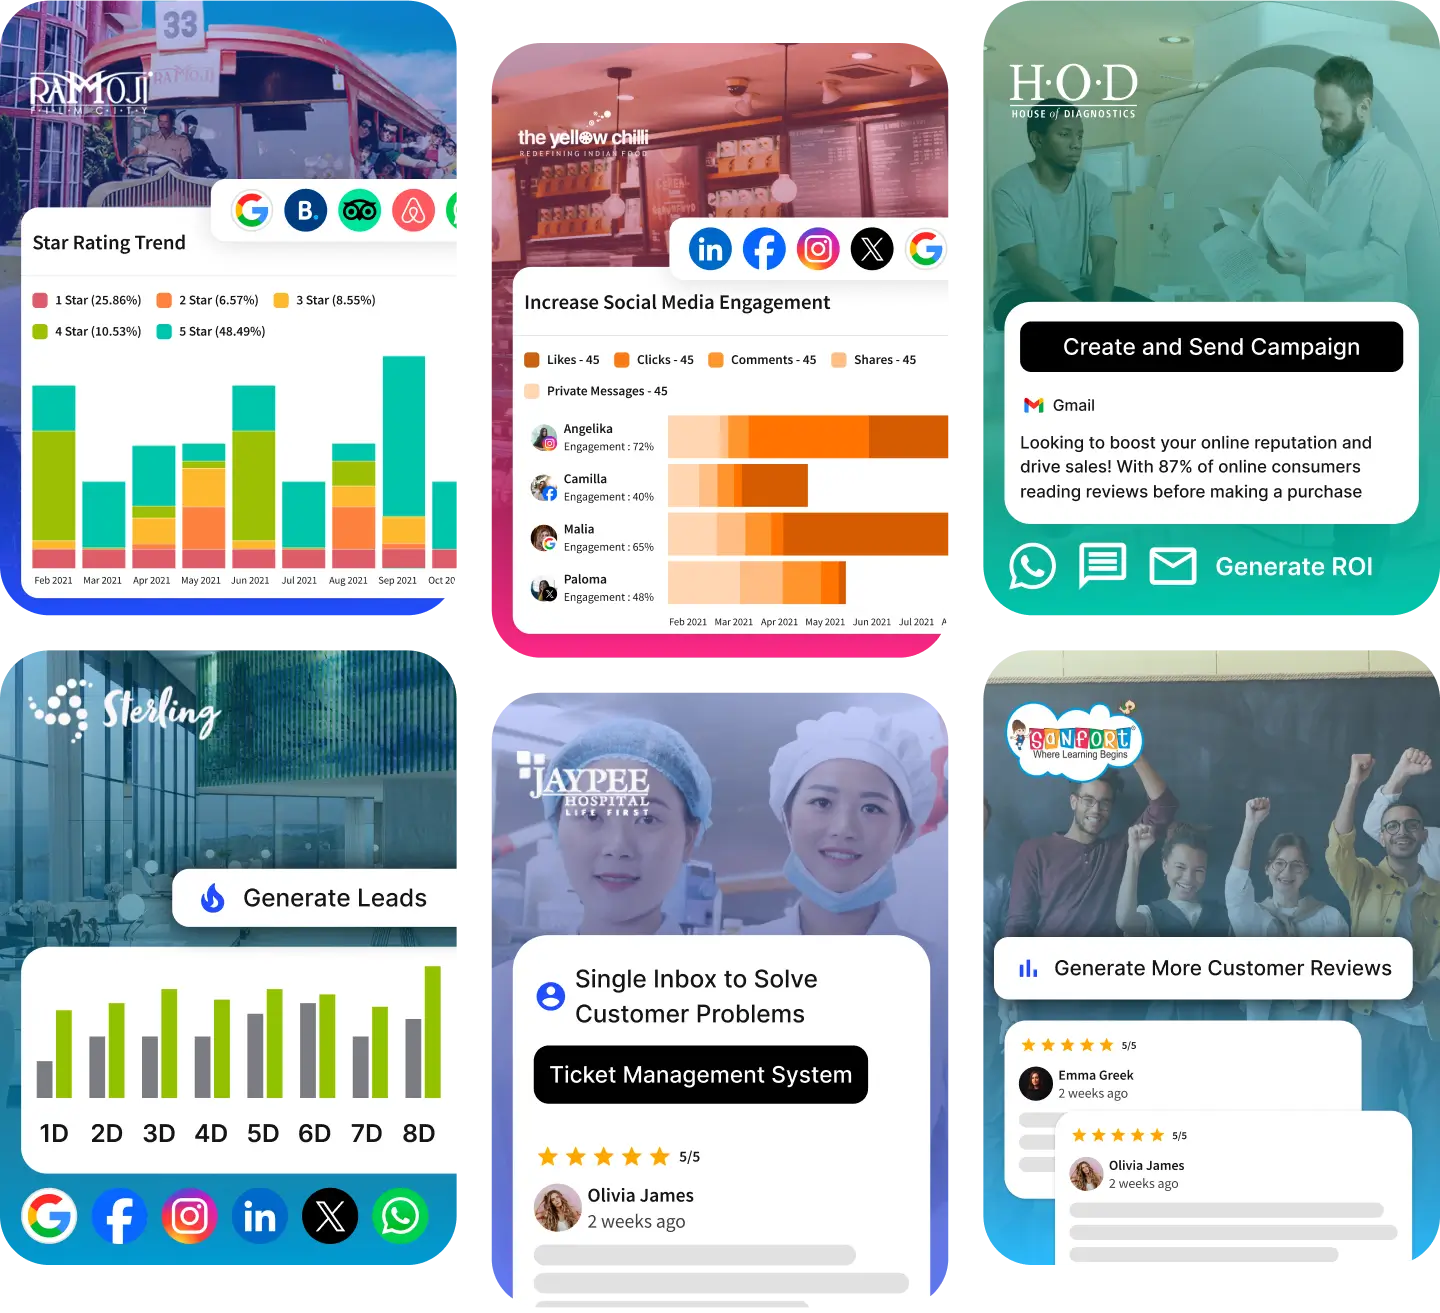 Customer engagement dashboard with positive review notification, social media growth statistics, and campaign success metrics